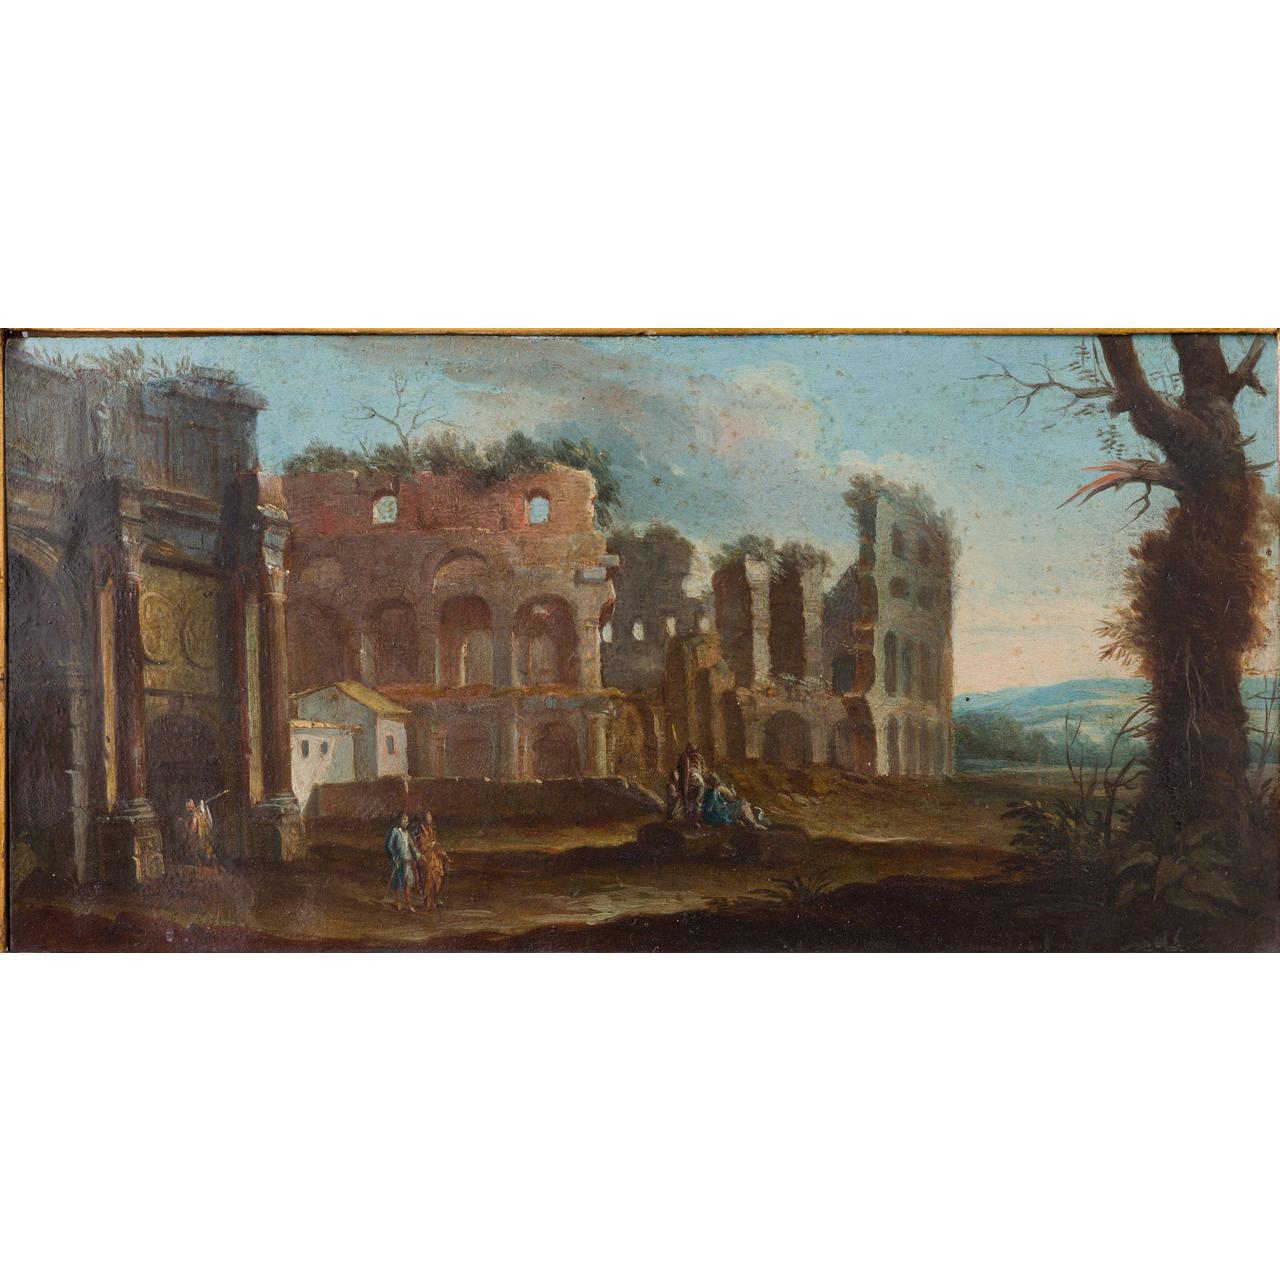 Dipinto: Pair of views: the Colosseum and the Costantine Arch (I)